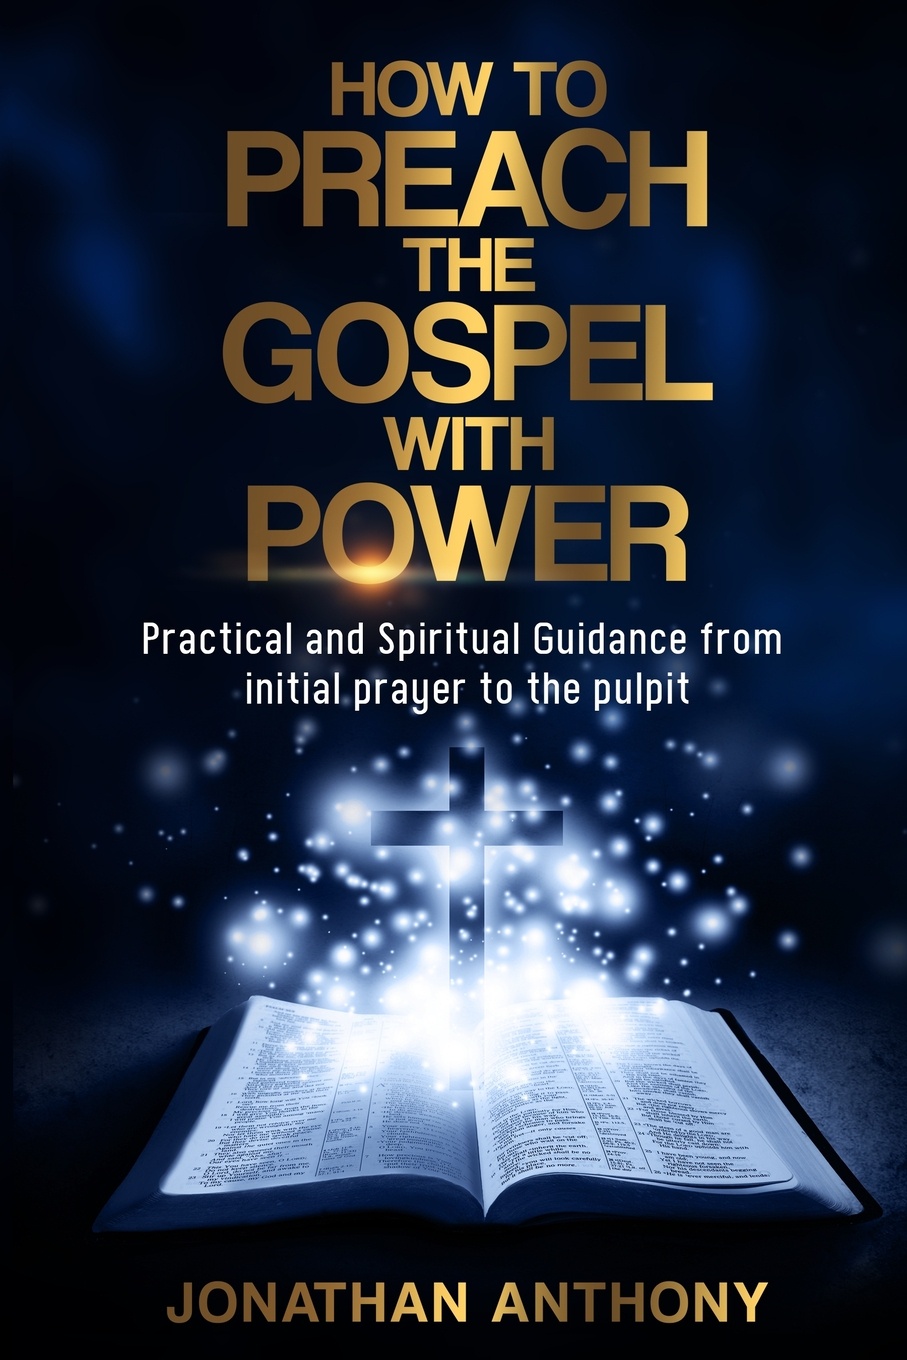 How to Preach the Gospel with Power. Practical and Spiritual Step by Step Guidance from initial Prayer to the Pulpit